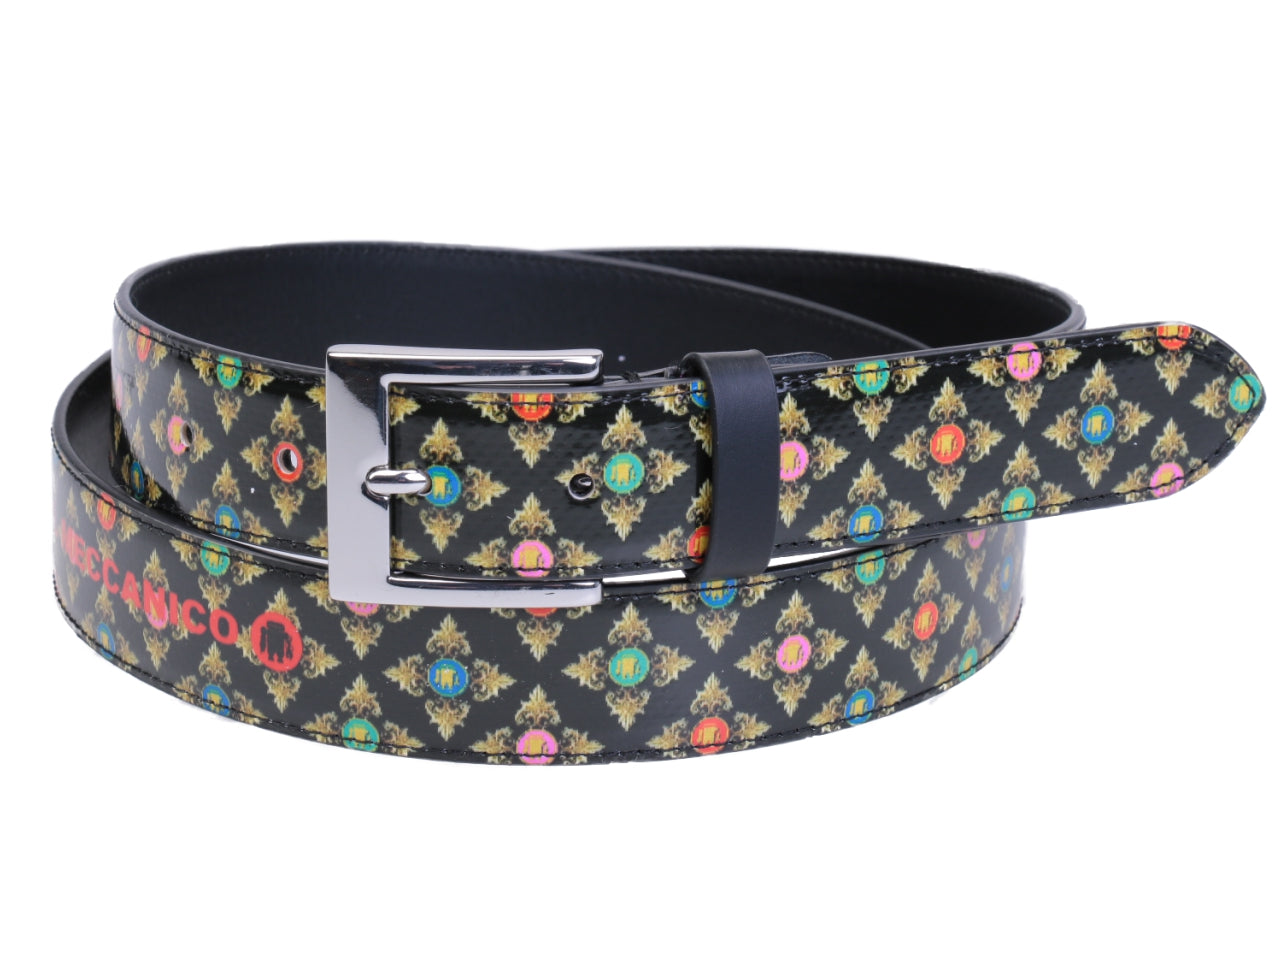 BLACK WOMEN'S BELT WITH LIBERTY FANTASY MADE OF LORRY TARPAULIN. - Unique Pieces Paul Meccanico